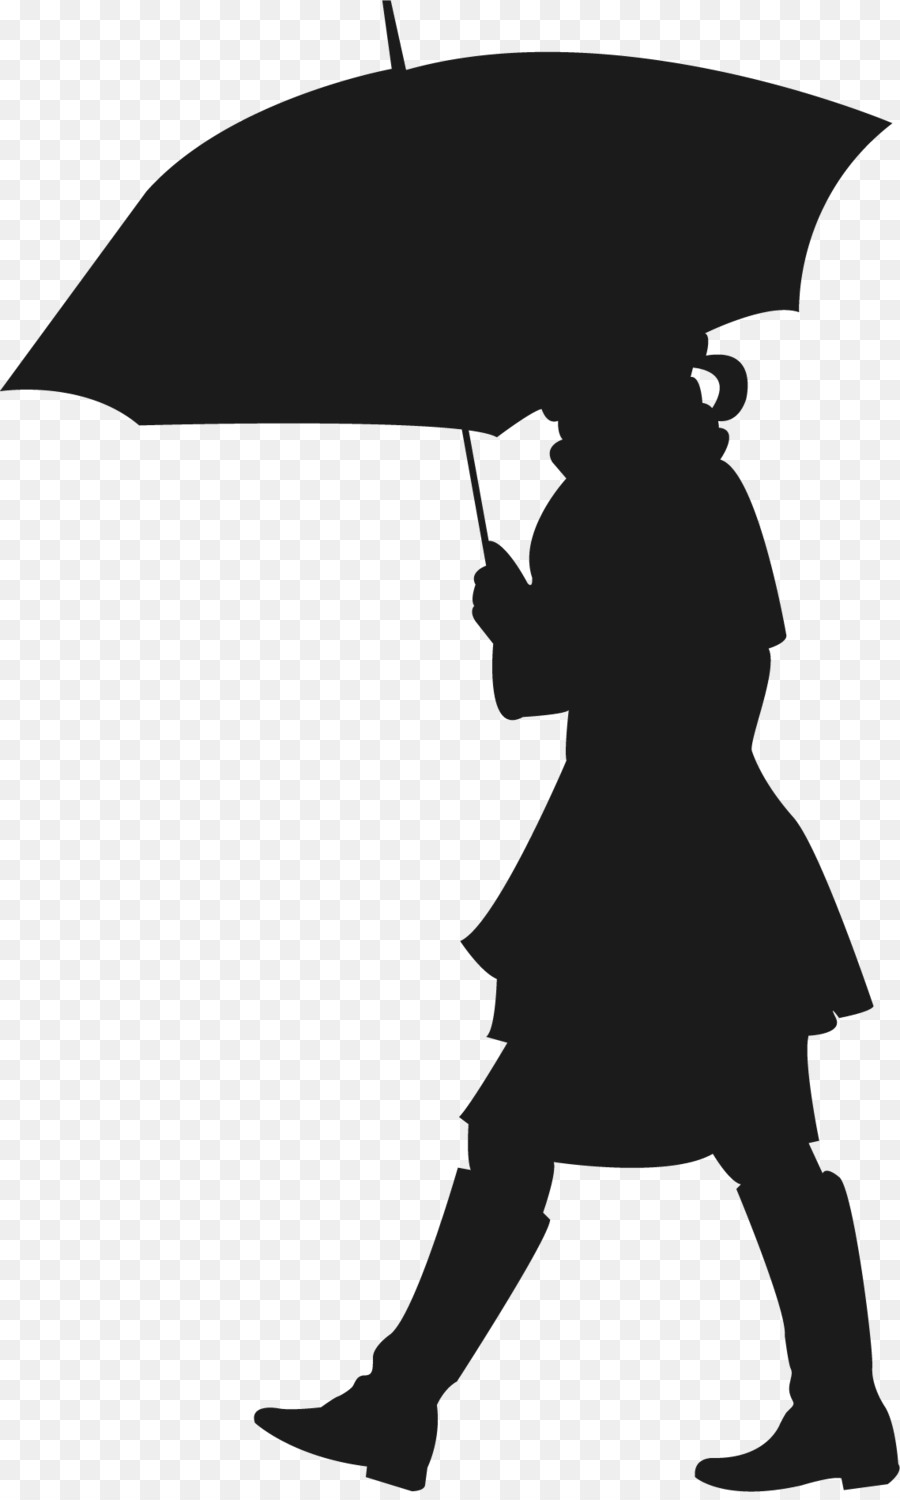 The Umbrellas Silhouette Wall decal Sticker - Pedestrians in the rain png download - 1139*1888 - Free Transparent Umbrellas png Download.